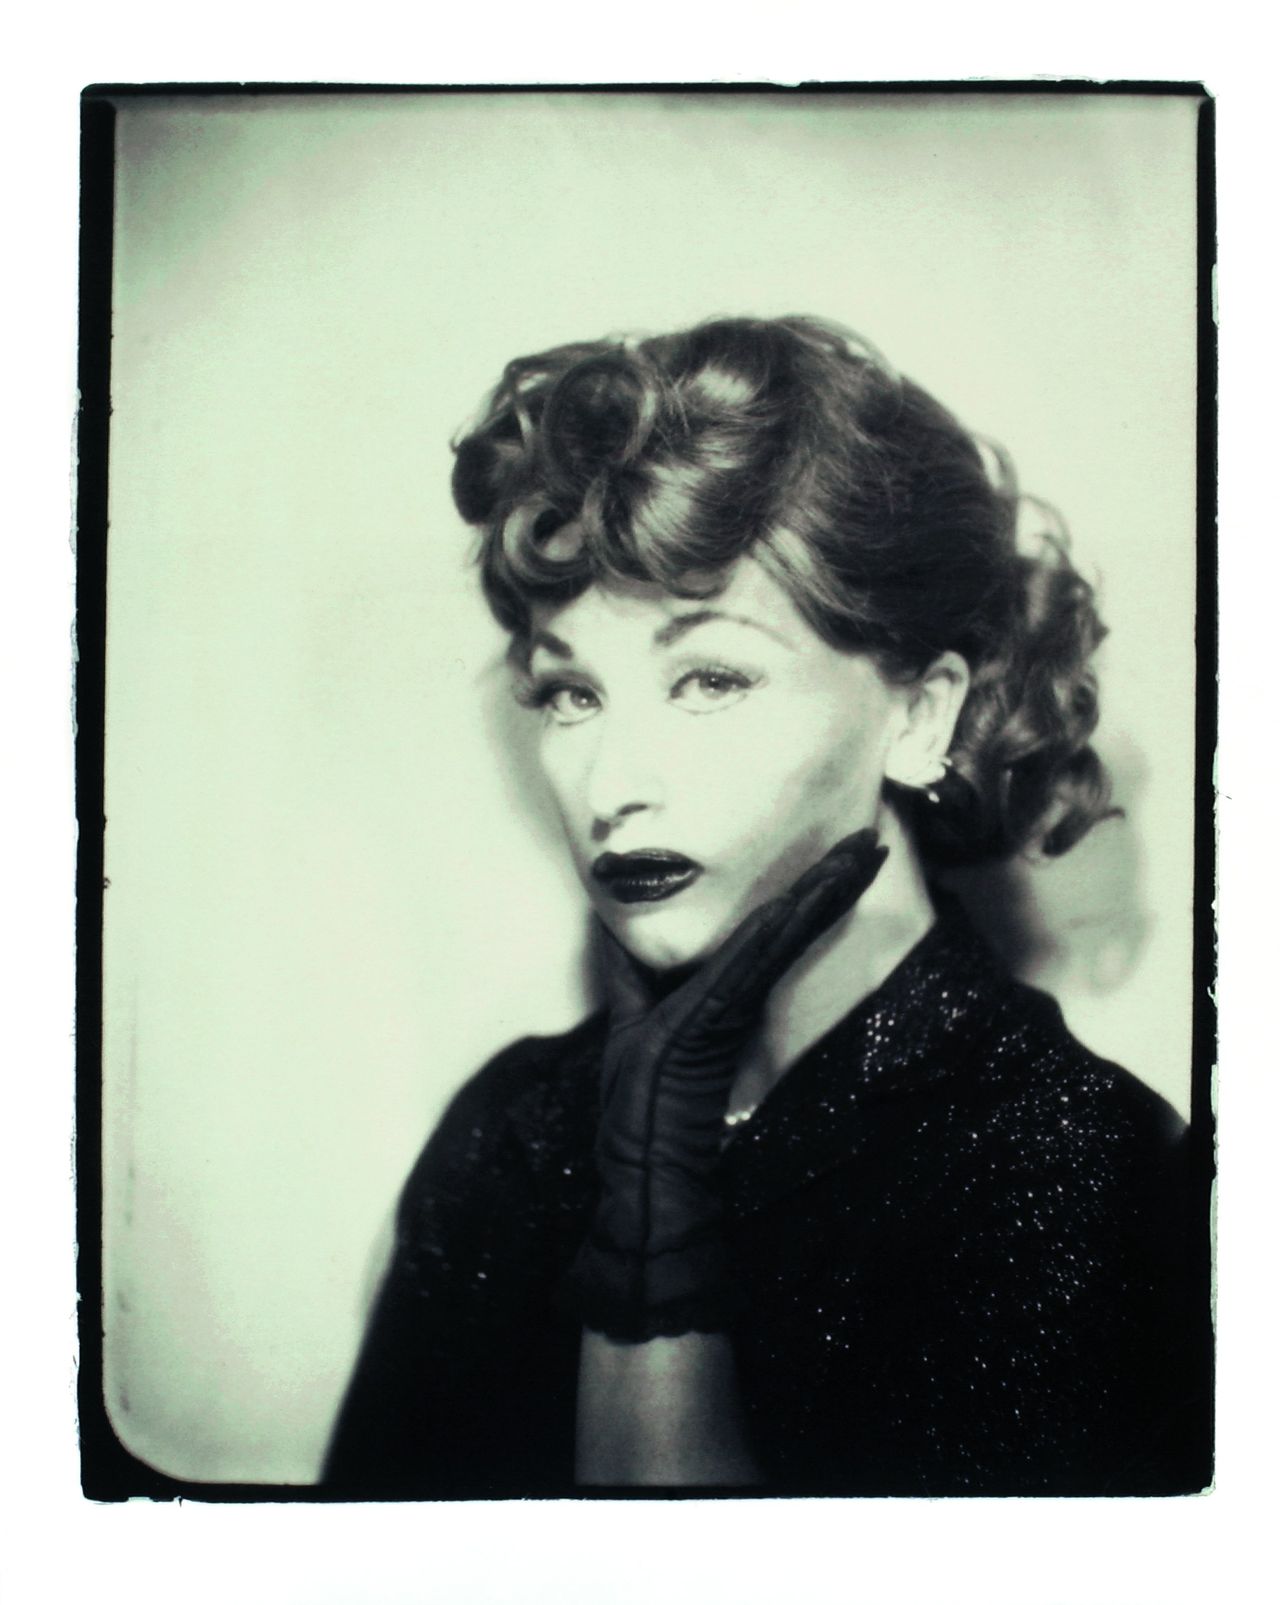 Cindy Sherman, "Untitled (Lucy)," 1975/2001